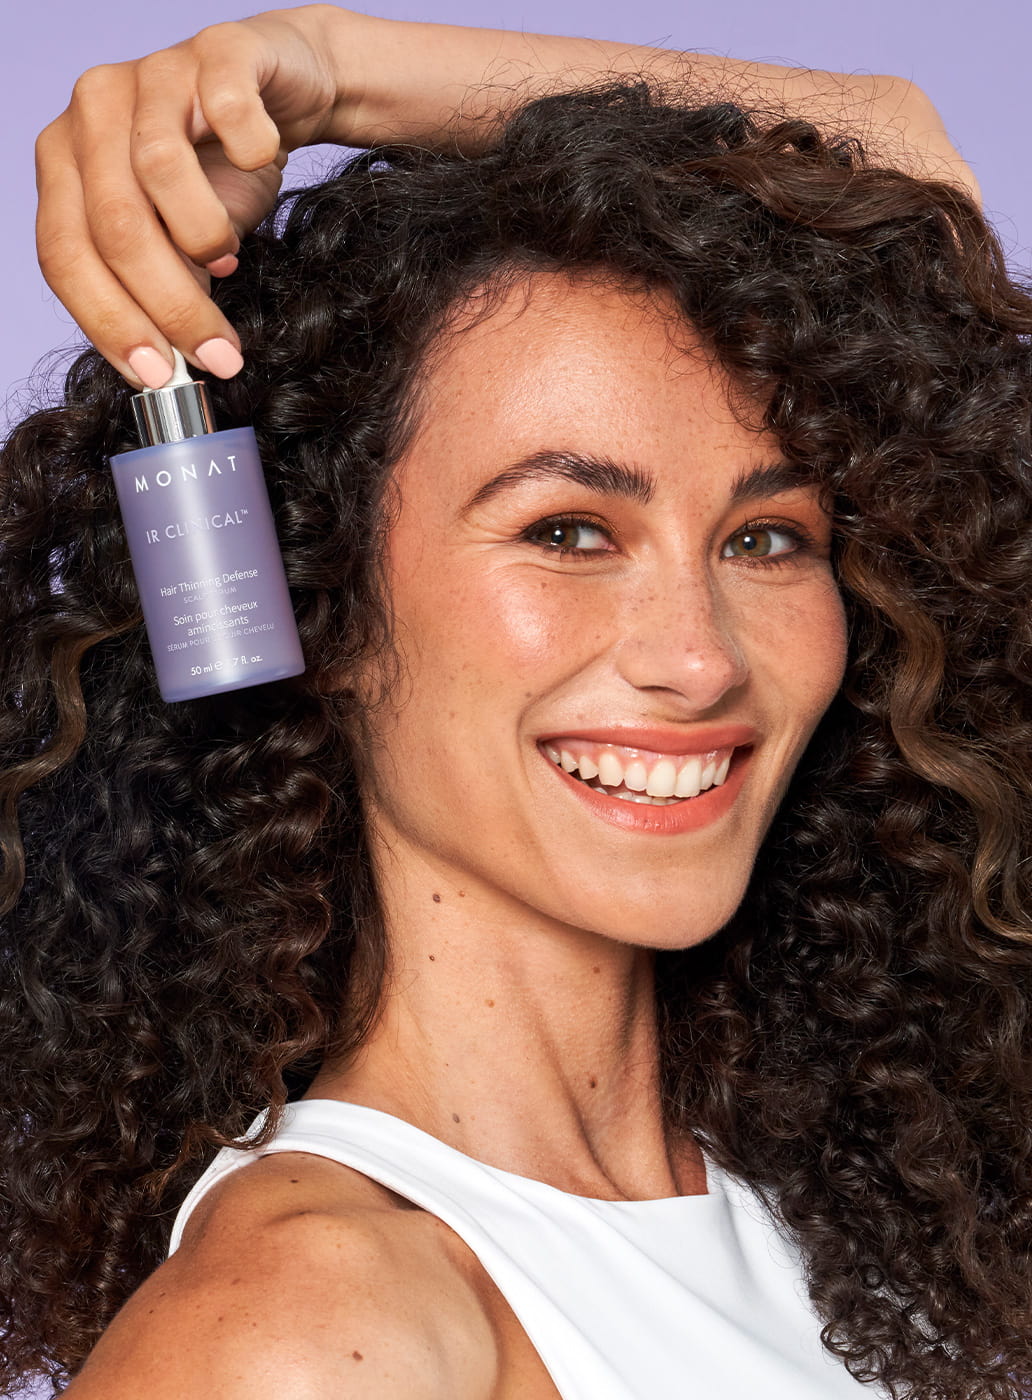 curly hair female posing with a IR CLINICAL™ HAIR THINNING DEFENSE next to her face